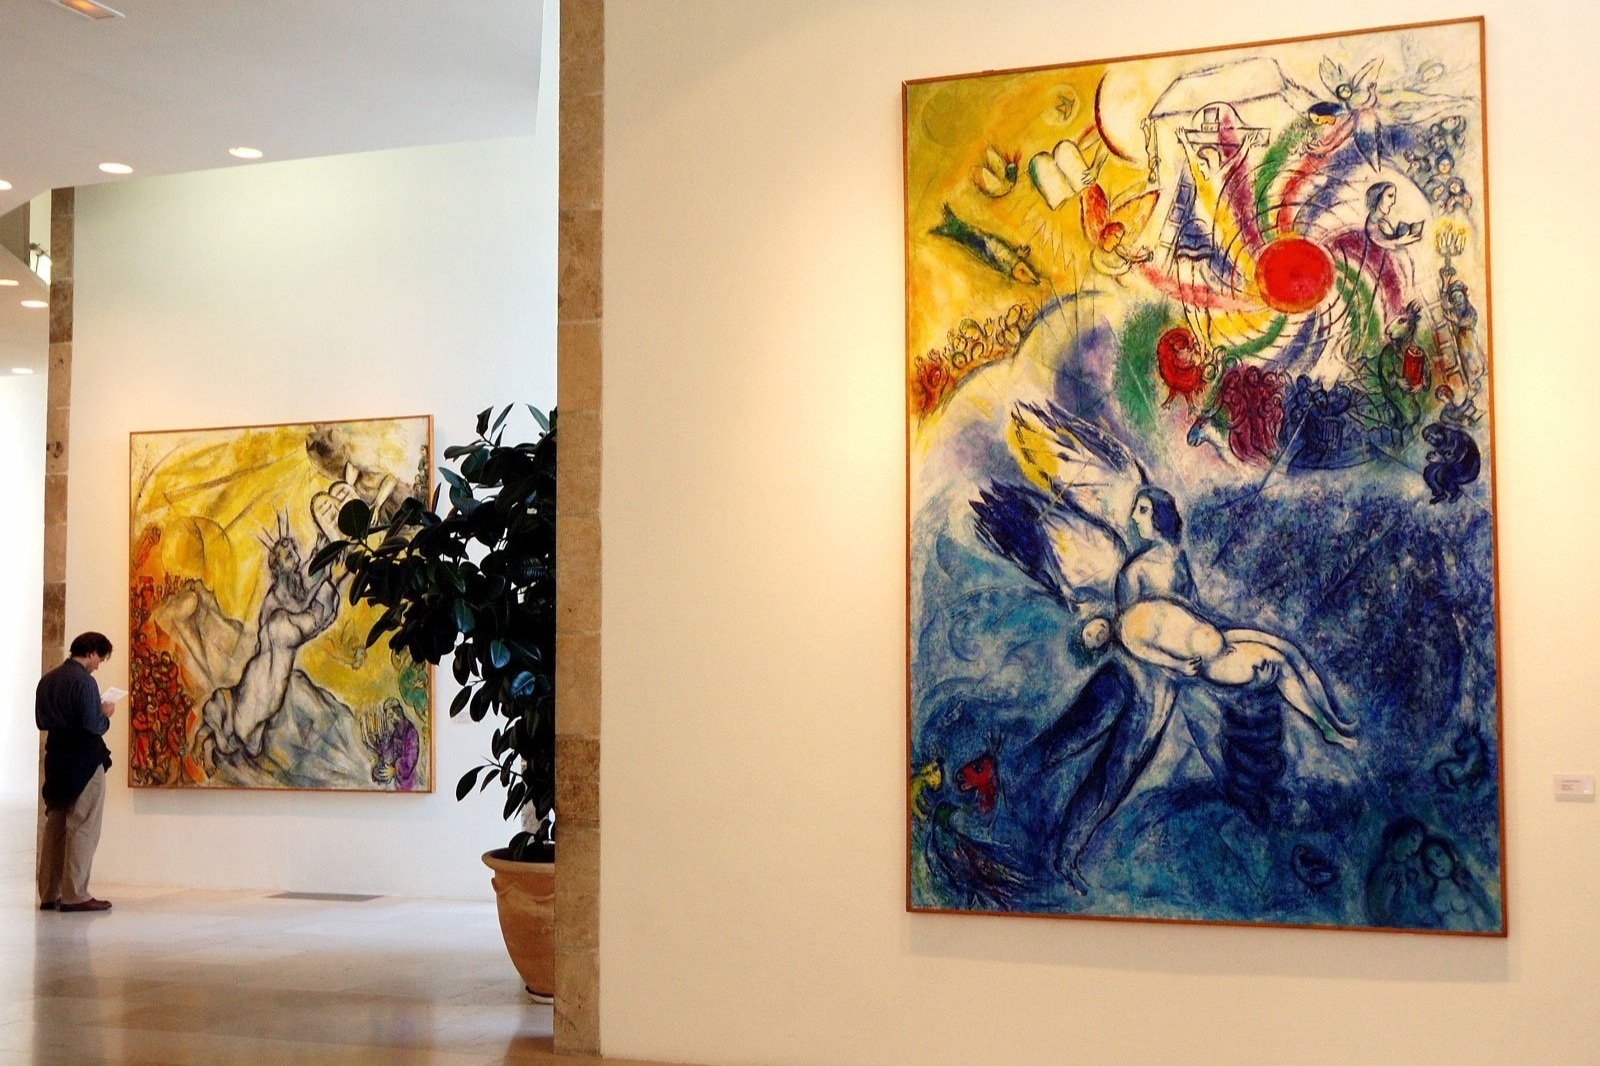 Jewel tones in Chagall's works, in Nice (Rosino, Flickr)